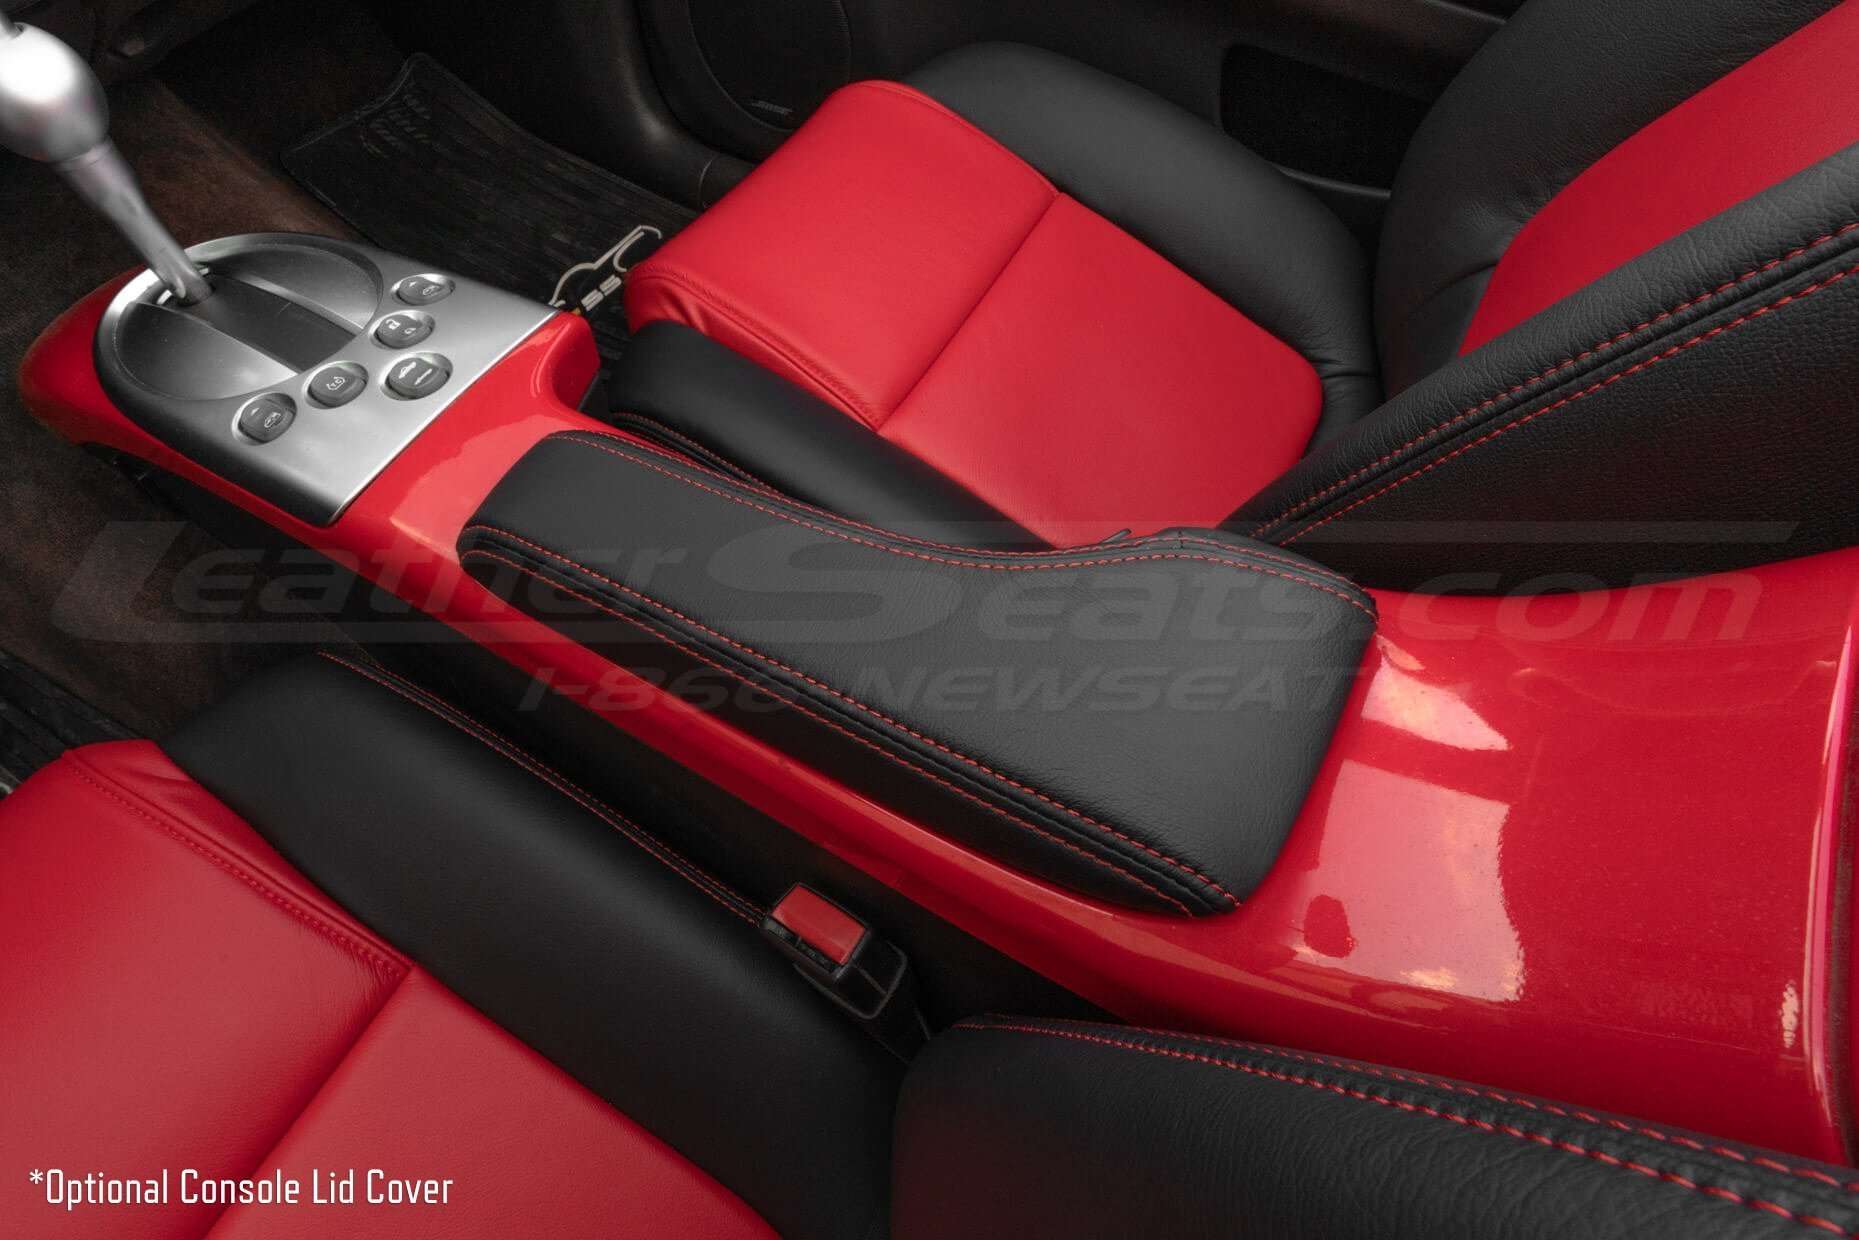 Optional Chevy SSR Console Lid Cover in Black leather with Bright red stitching